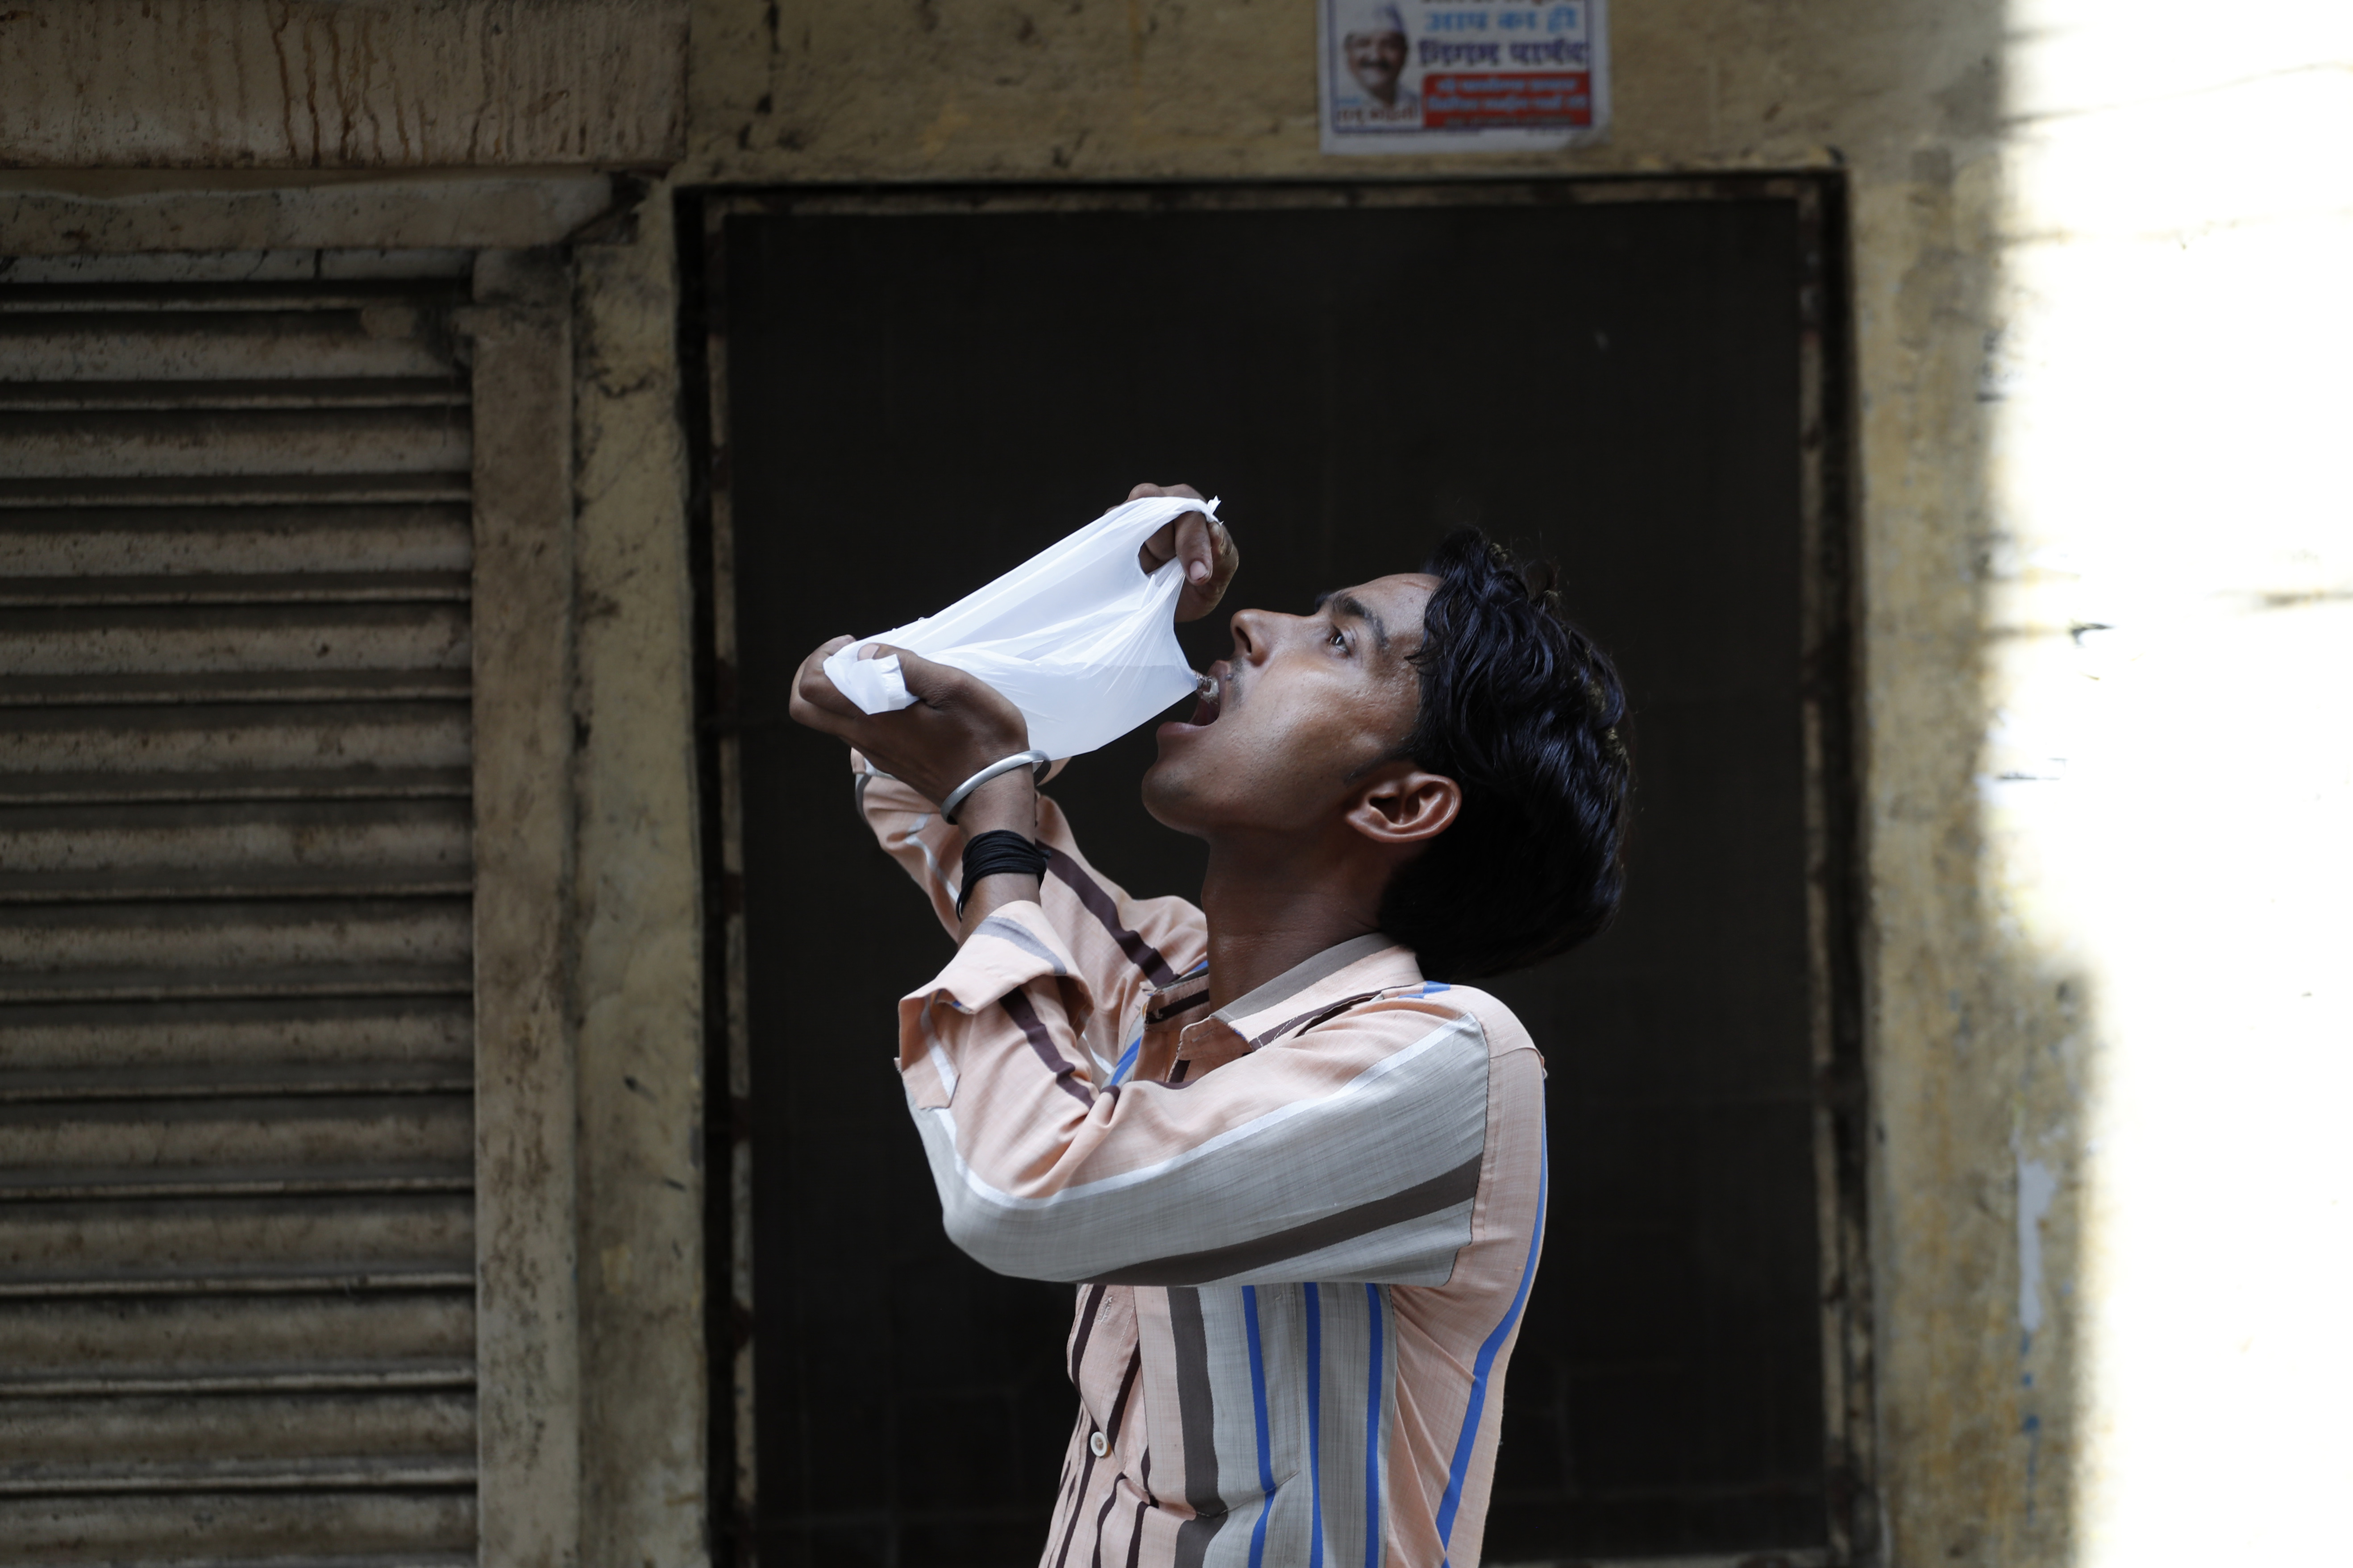 An Indian man drinks water from a plastic bag on a hot summer day in New Delhi, India, Monday, June 5, 2017. Most parts of northern India is reeling under intense heat wave conditions with the temperature crossing over 43 degrees Celsius (109.4 Fahrenheit).(AP Photo/Tsering Topgyal)